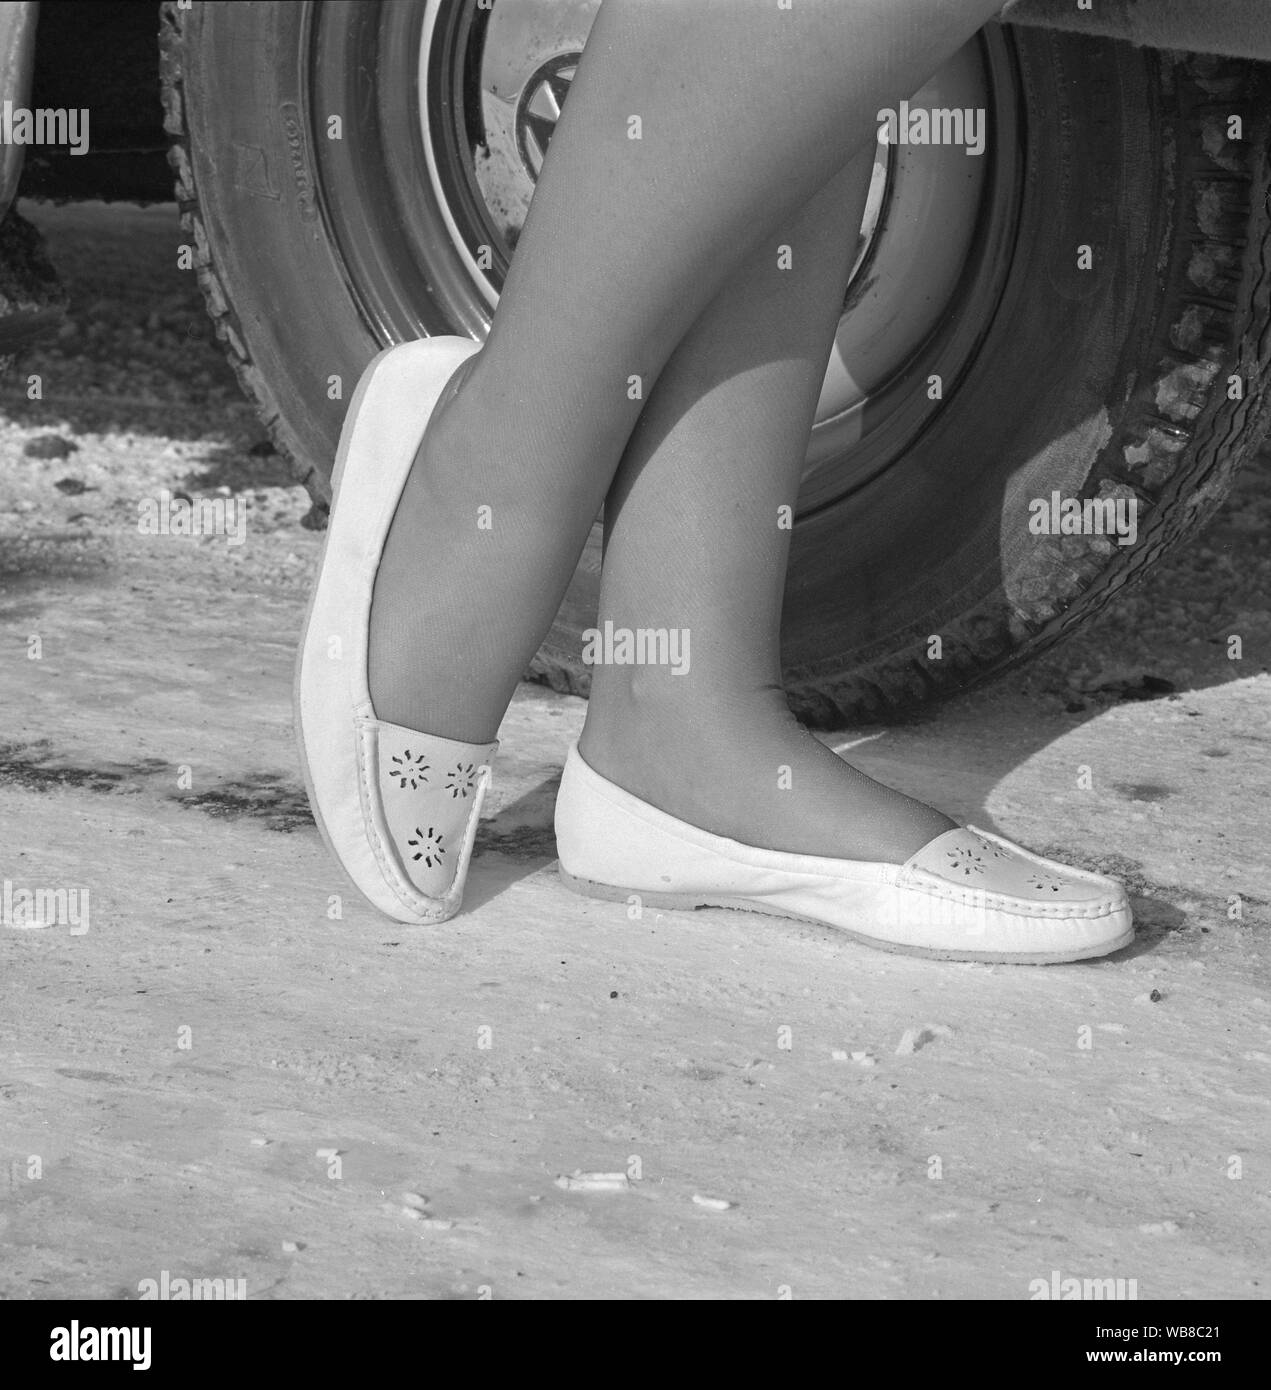 Driving in the 1960s. A woman demonstrates a new pair of shoes especially designed to be comfortable when driving the car. Sweden 1962 Stock Photo